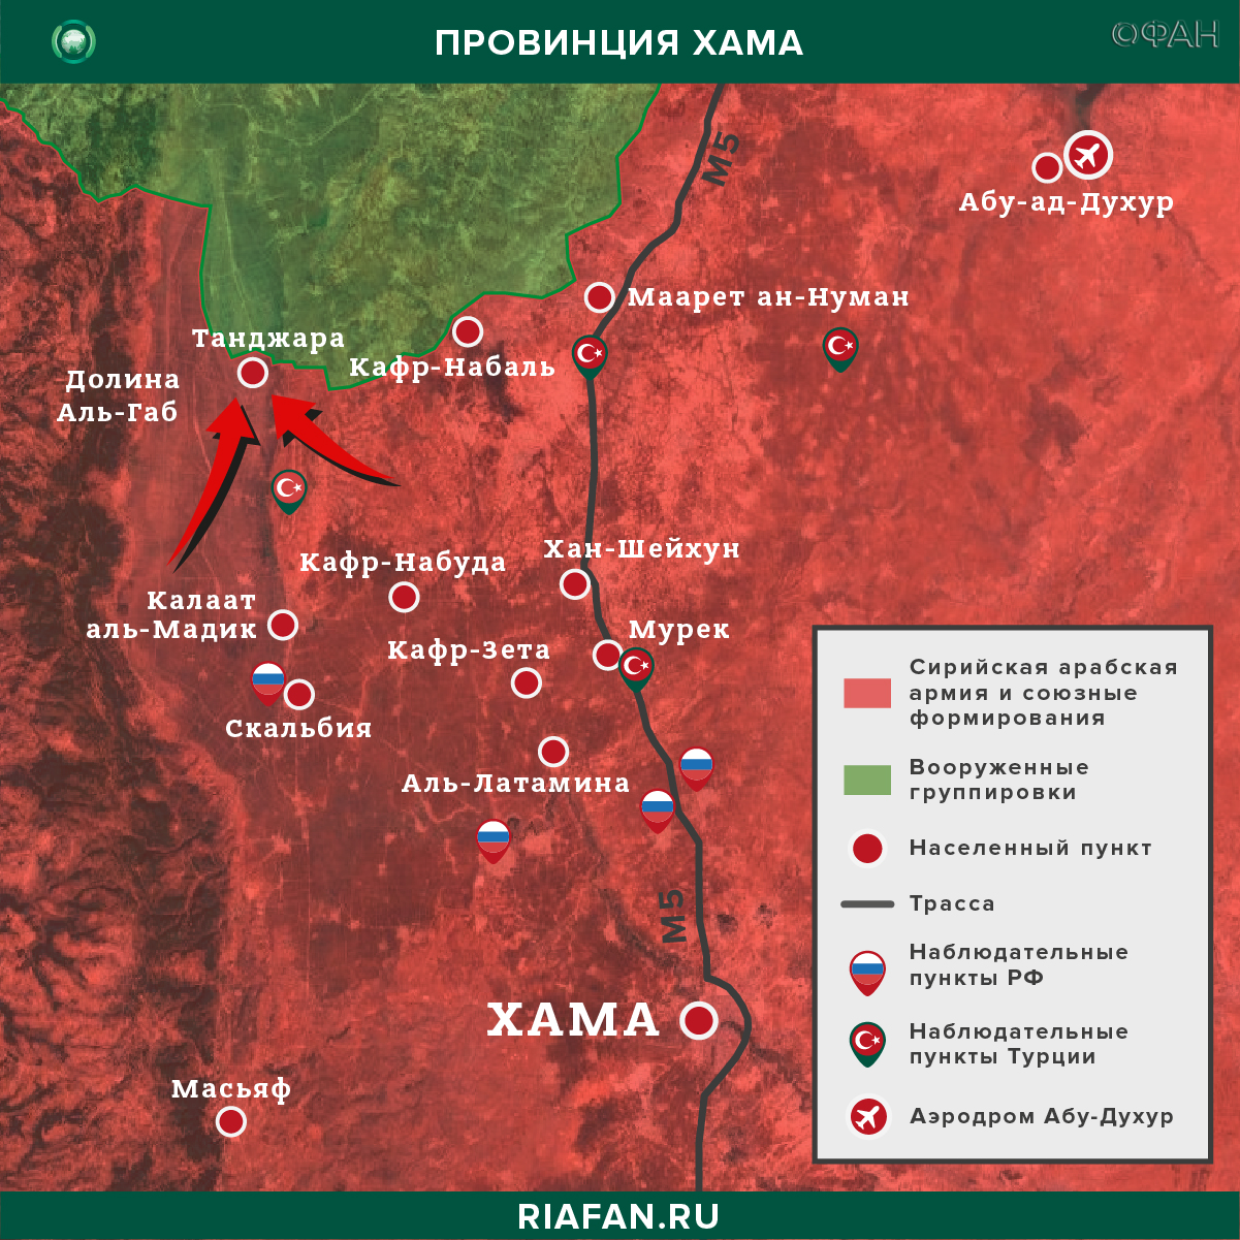 Terrorists escaped from the Syrian army after the unsuccessful capture of Tanjara